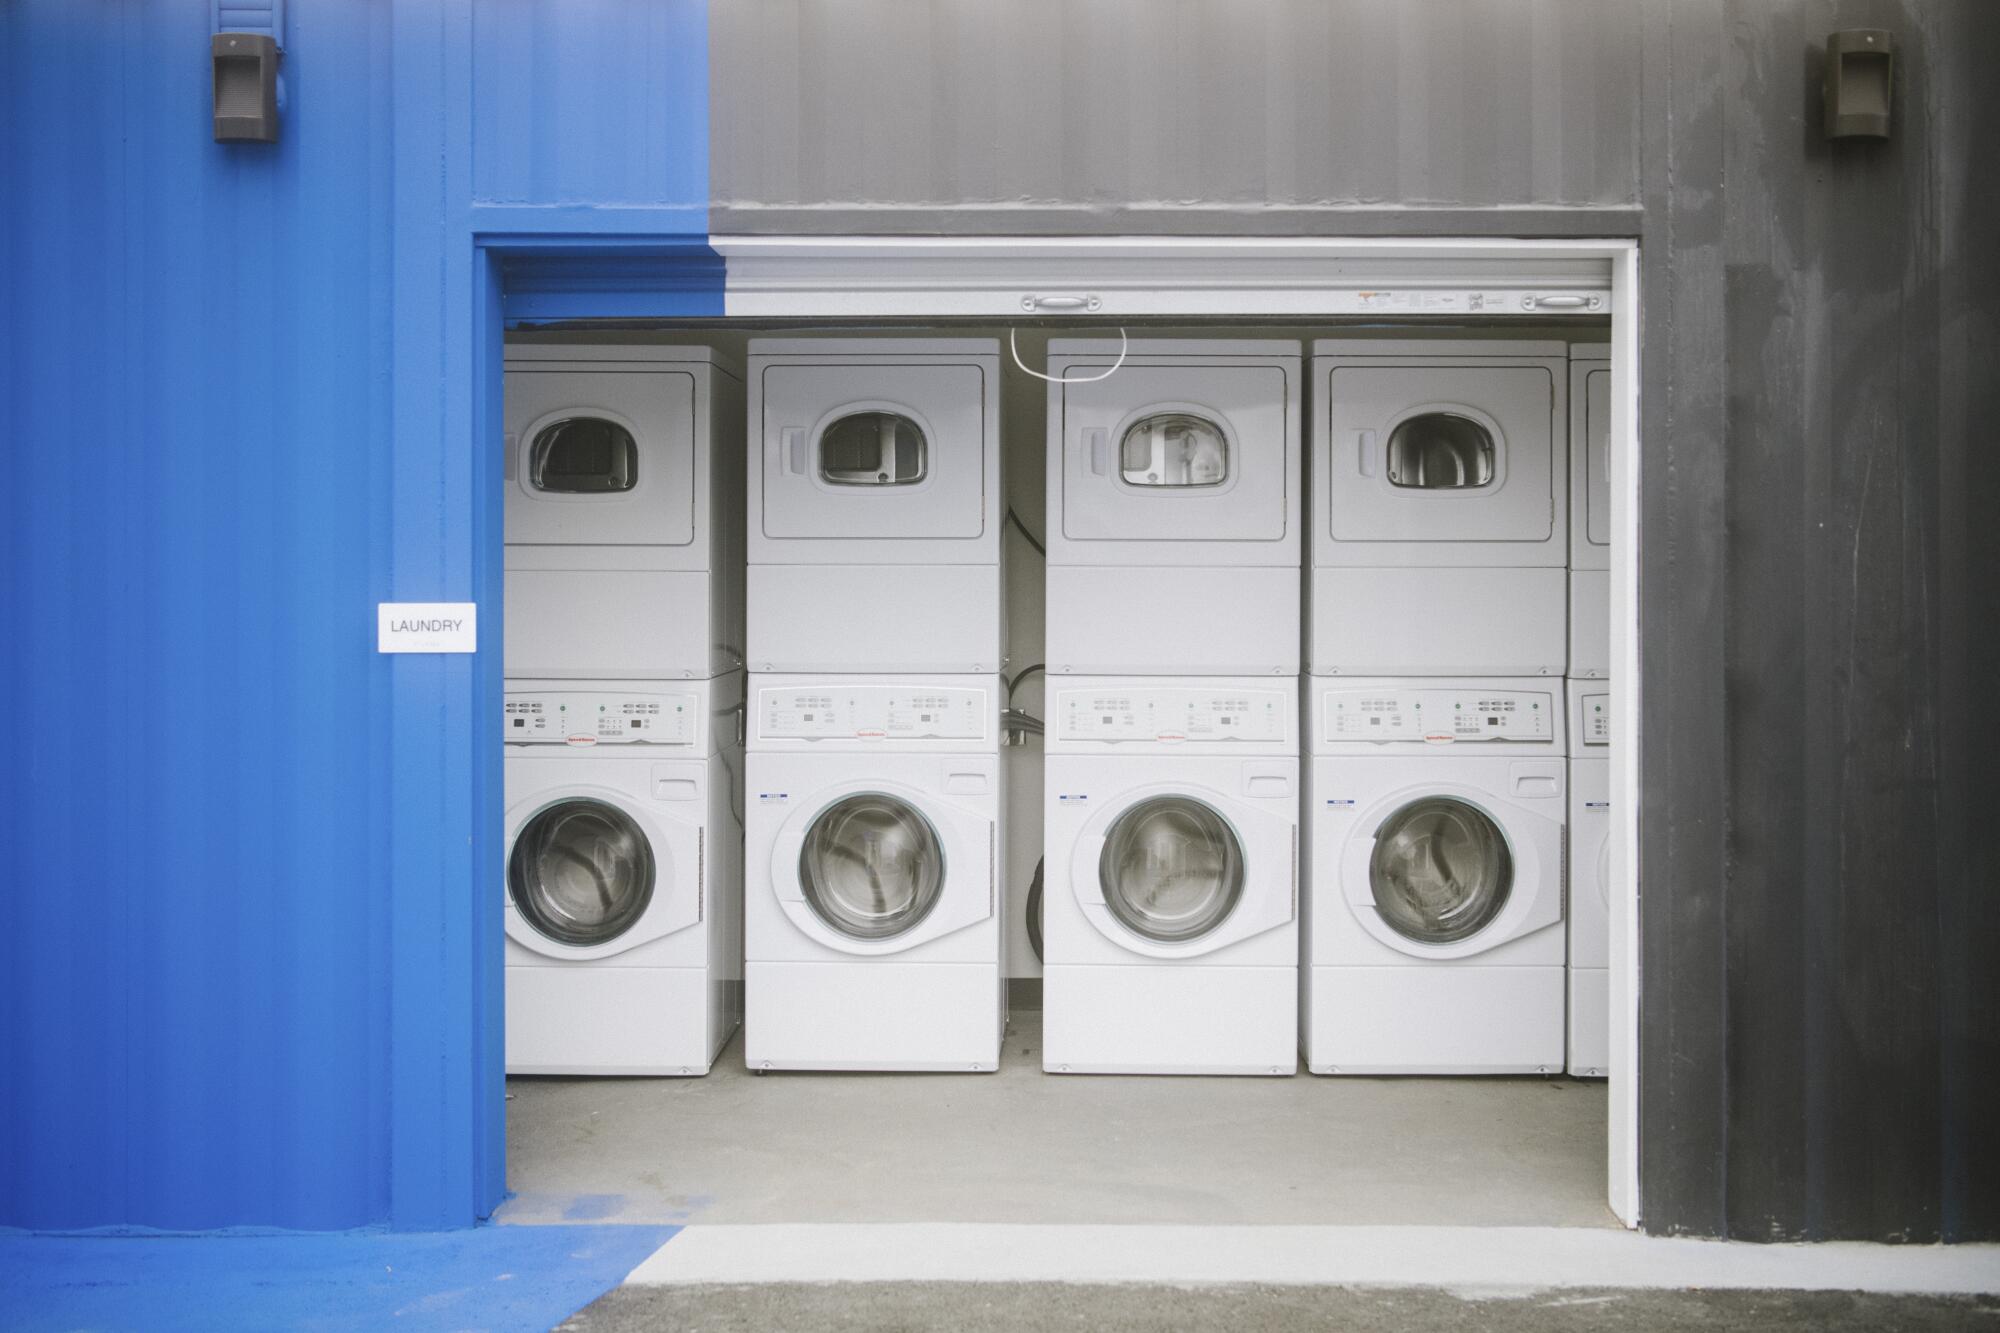 A communal laundry with stacked washers and dryers inside a blue and gray building. 